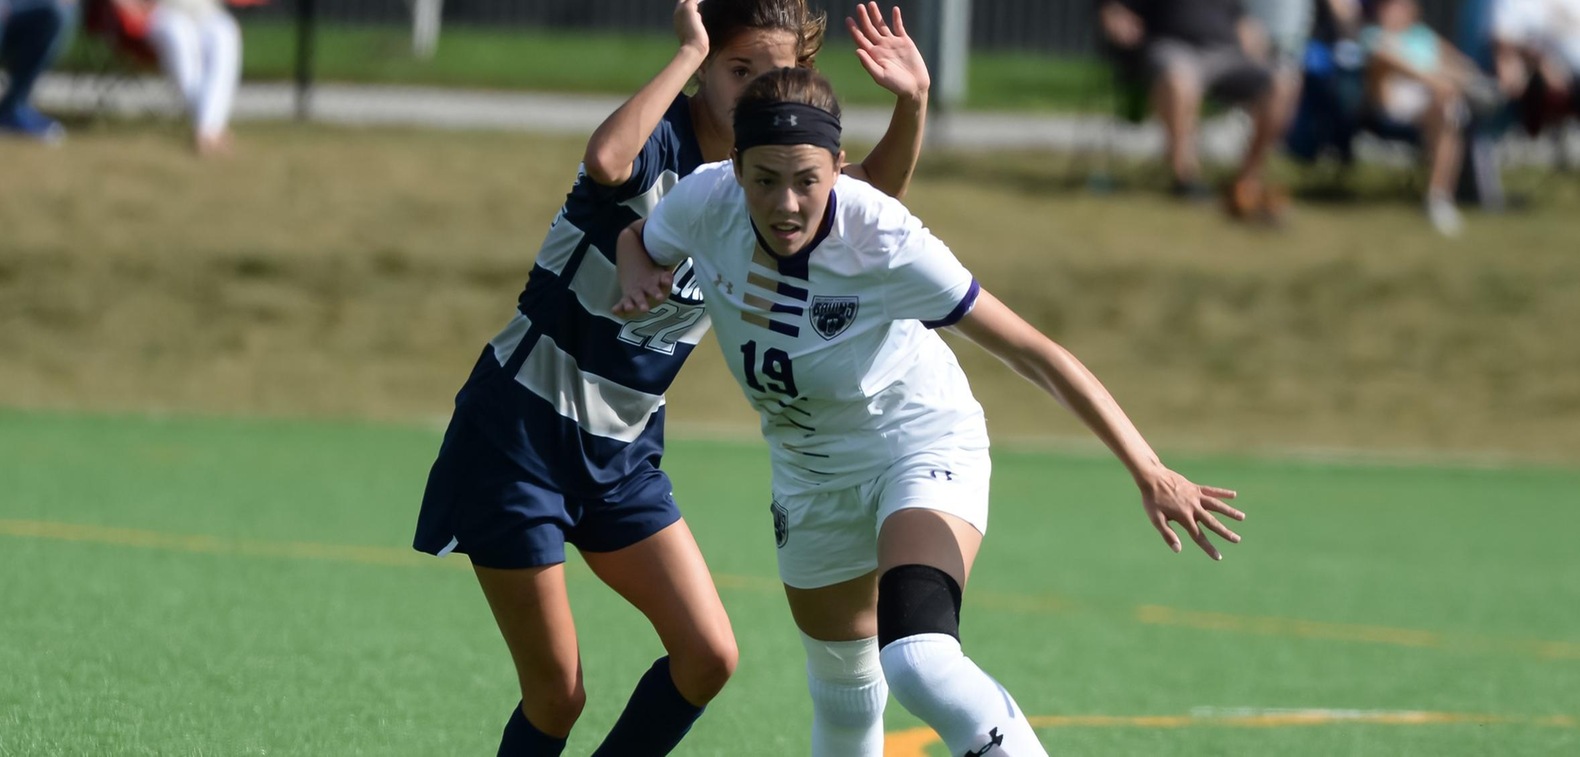 Maddy Vasquez scored the game-winner from 25 yards on Wedneday.